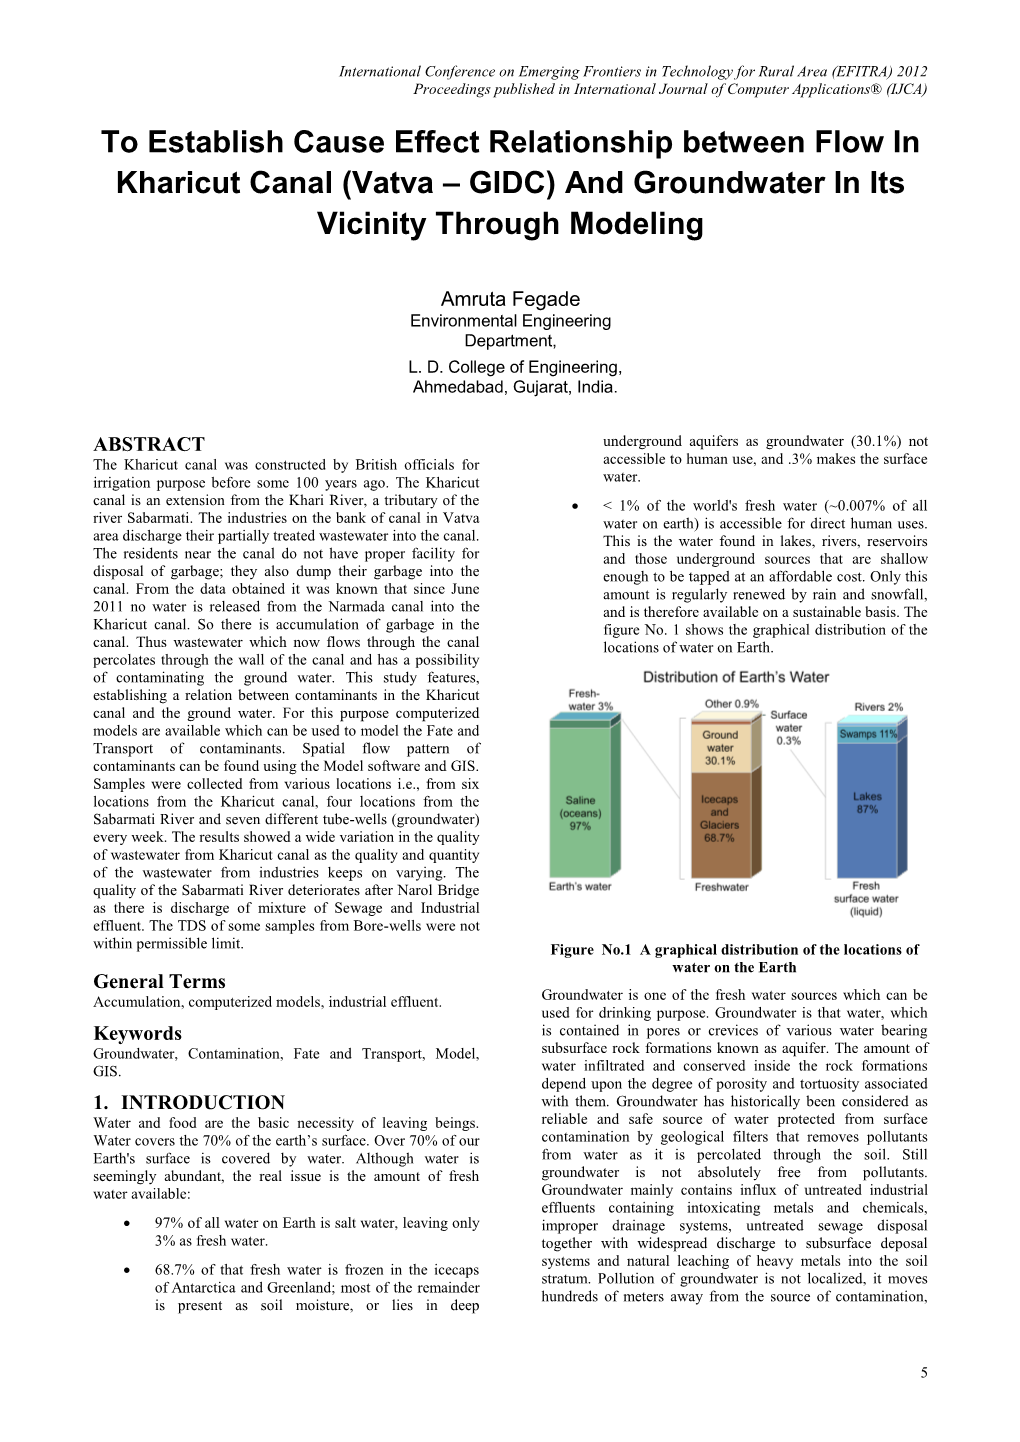 (Vatva – GIDC) and Groundwater in Its Vicinity Through Modeling